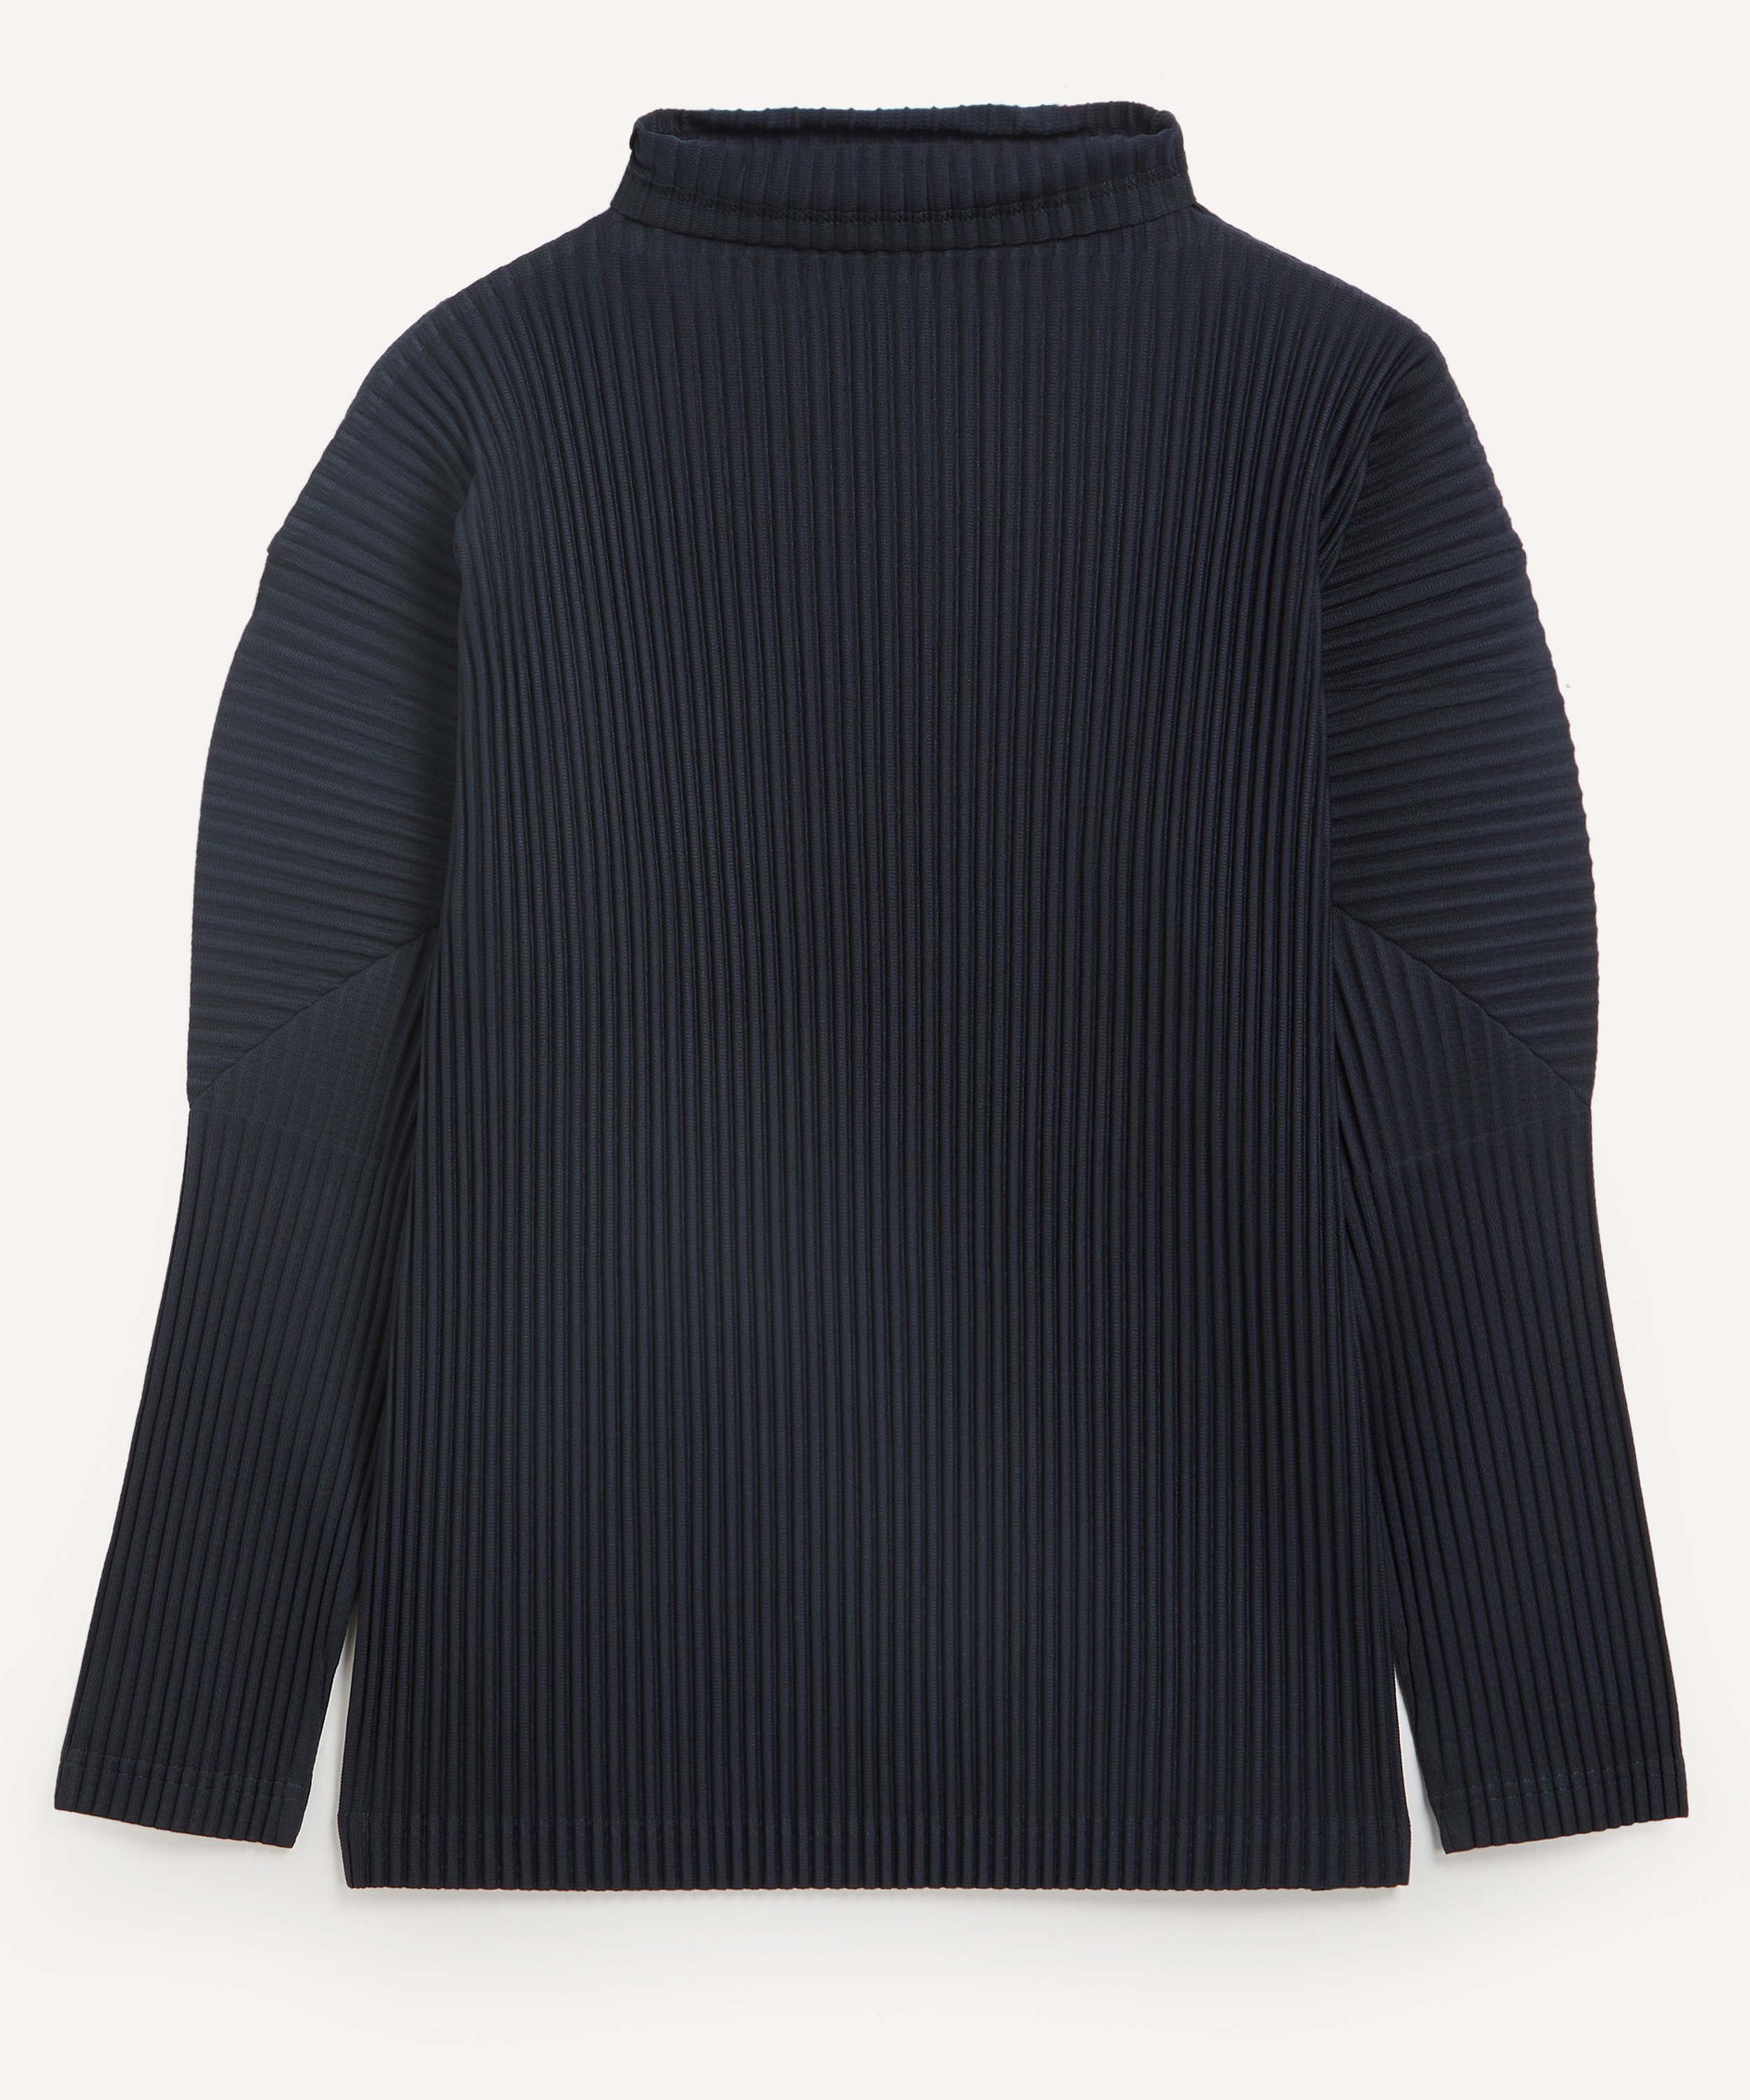 HOMME PLISSÉ ISSEY MIYAKE - Core Pleated High-Neck Top image number 0